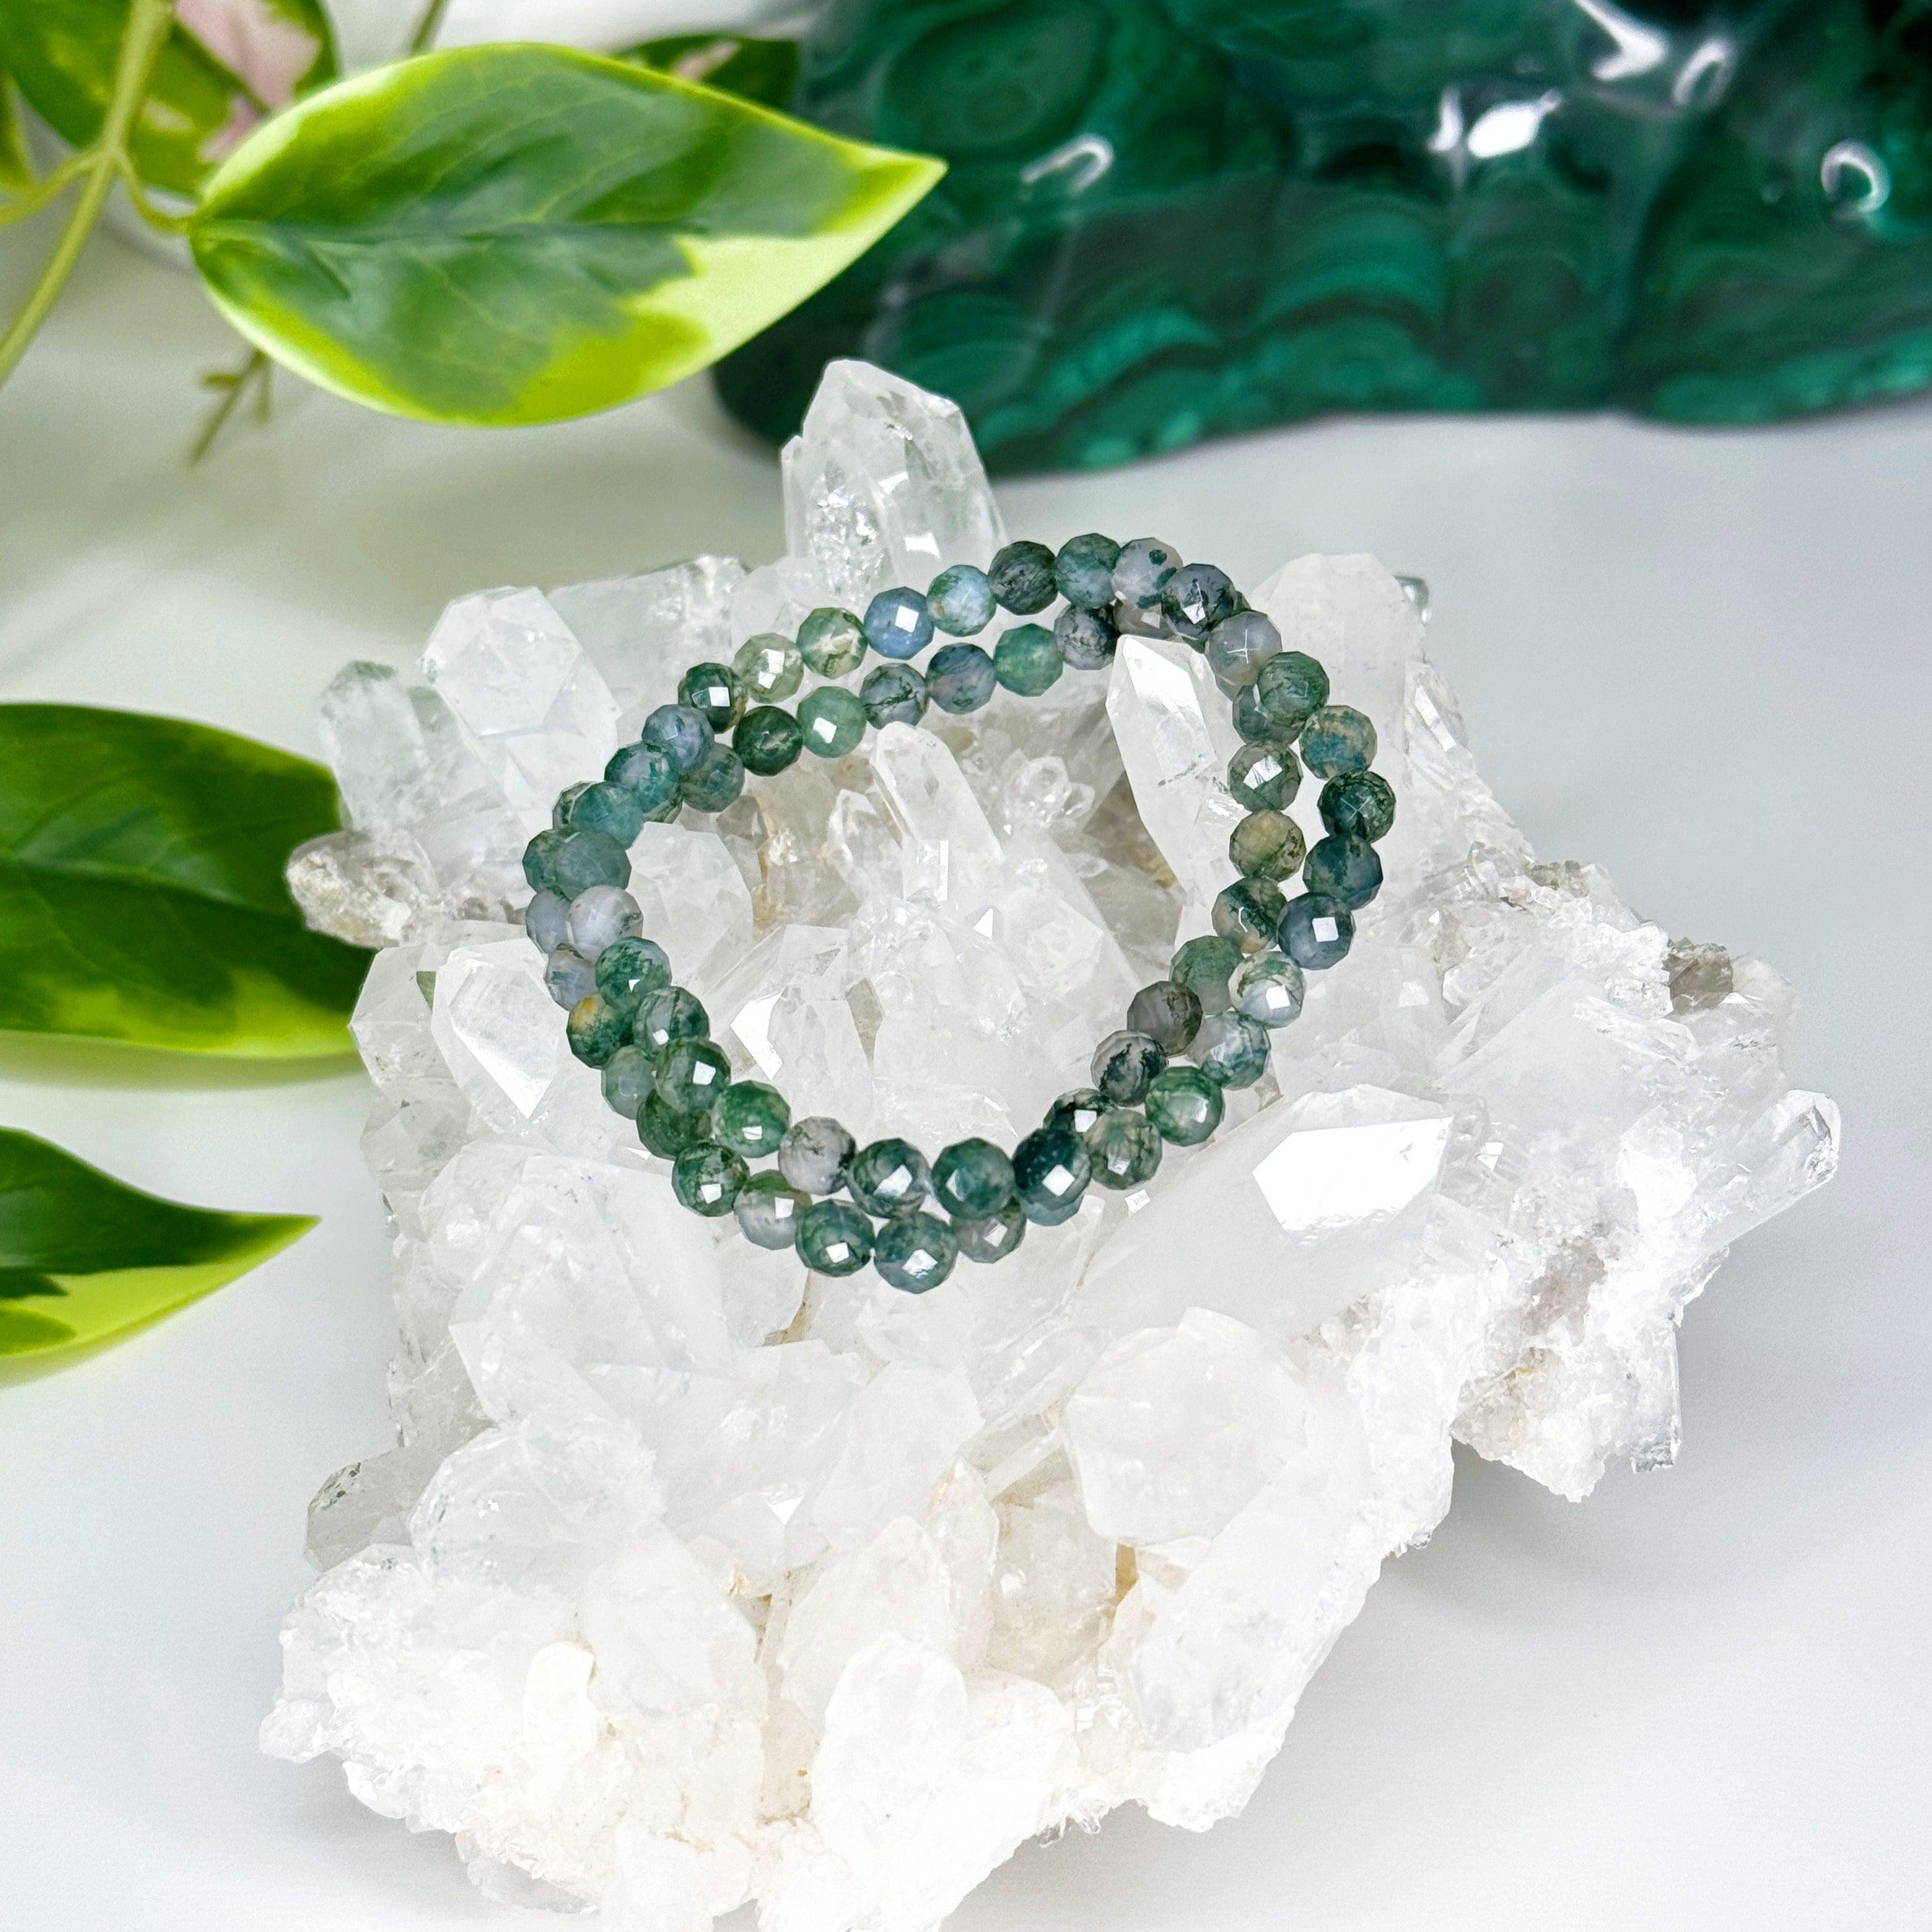 MOSS AGATE (FACETED) 6mm - HANDMADE CRYSTAL BRACELET - 6mm, bracelet, crystal bracelet, earth, emotional support, faceted, handmade bracelet, jewelry, market bracelet, mercury retrograde stack, moss agate, new beginnings gift bundle, recently added, single bracelets, solstice collection, virgo, virgo stack, Wearable, winter solstice collection - The Mineral Maven